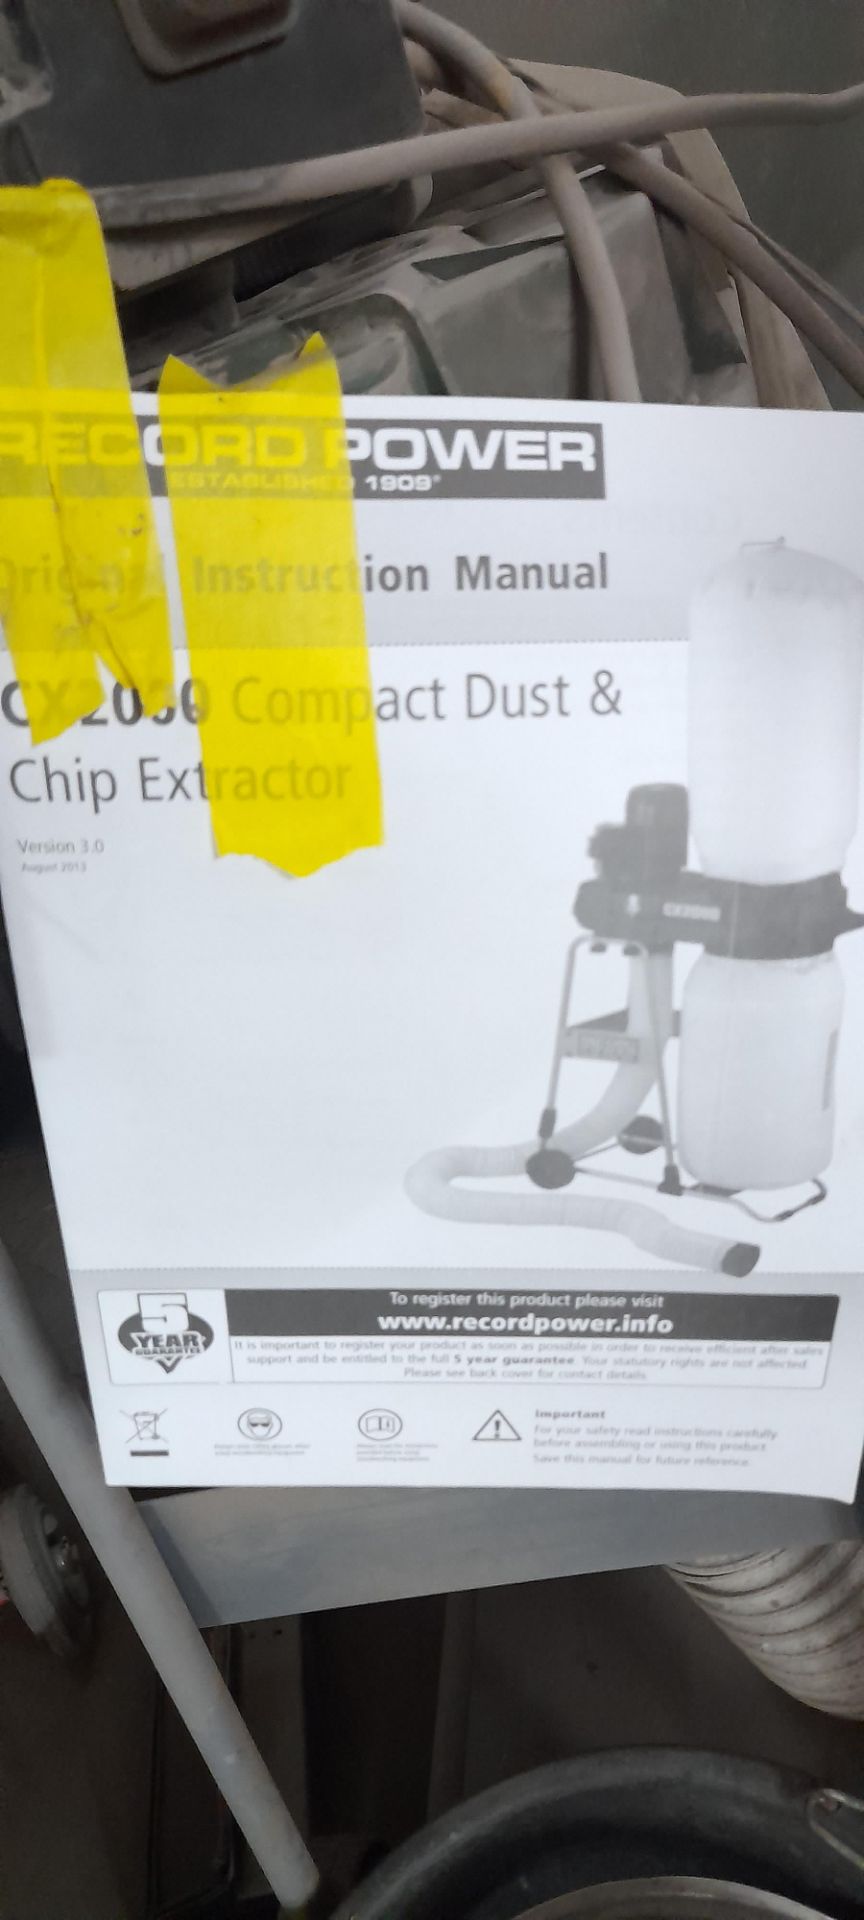 Rilord Power 6X200P Compact Dust Extractor - Image 2 of 2